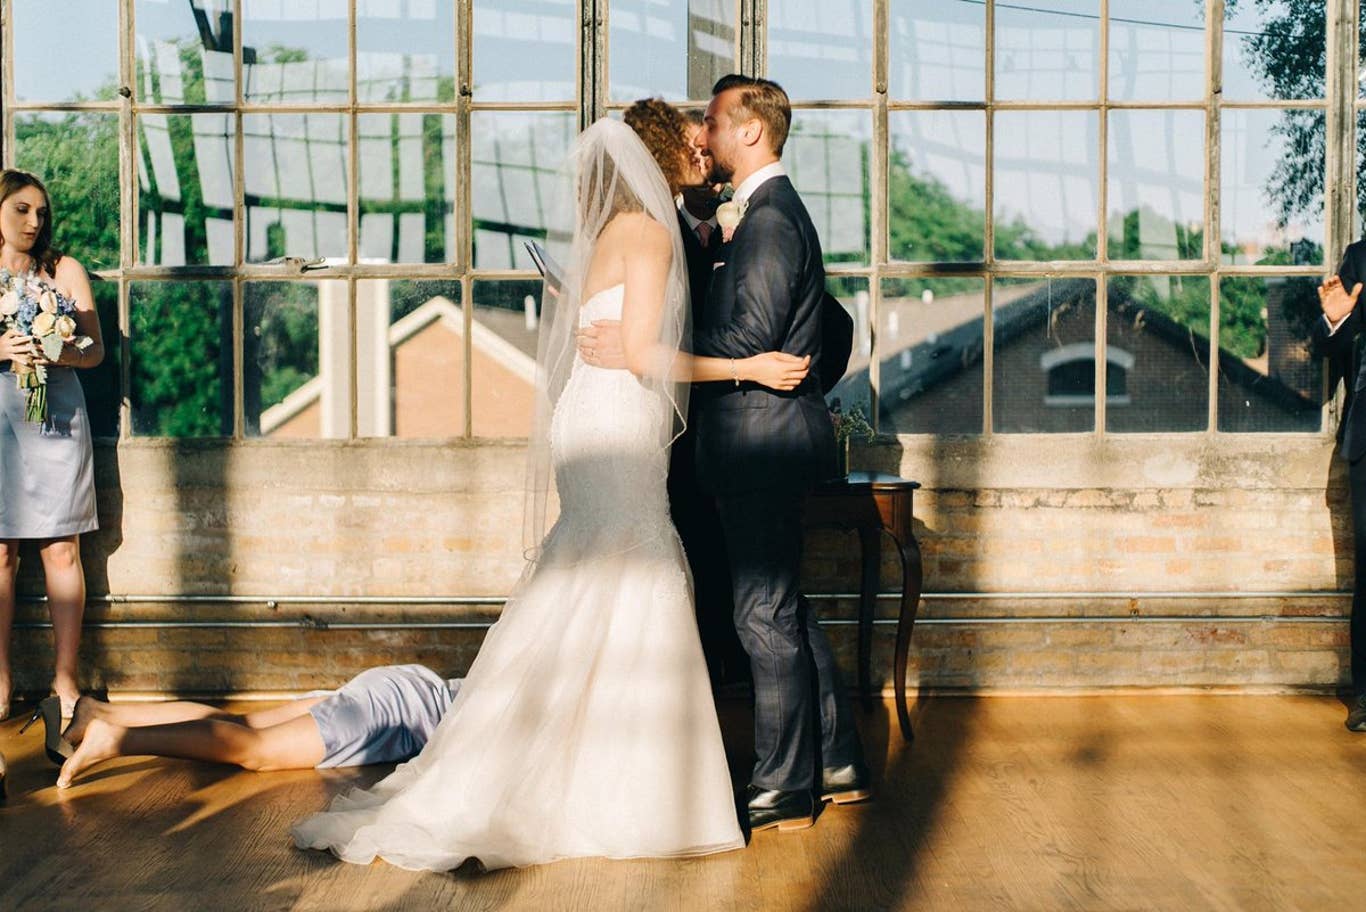 A Fainting Bridesmaid Made These Wedding Pictures The Most Memorable Portraits Ever